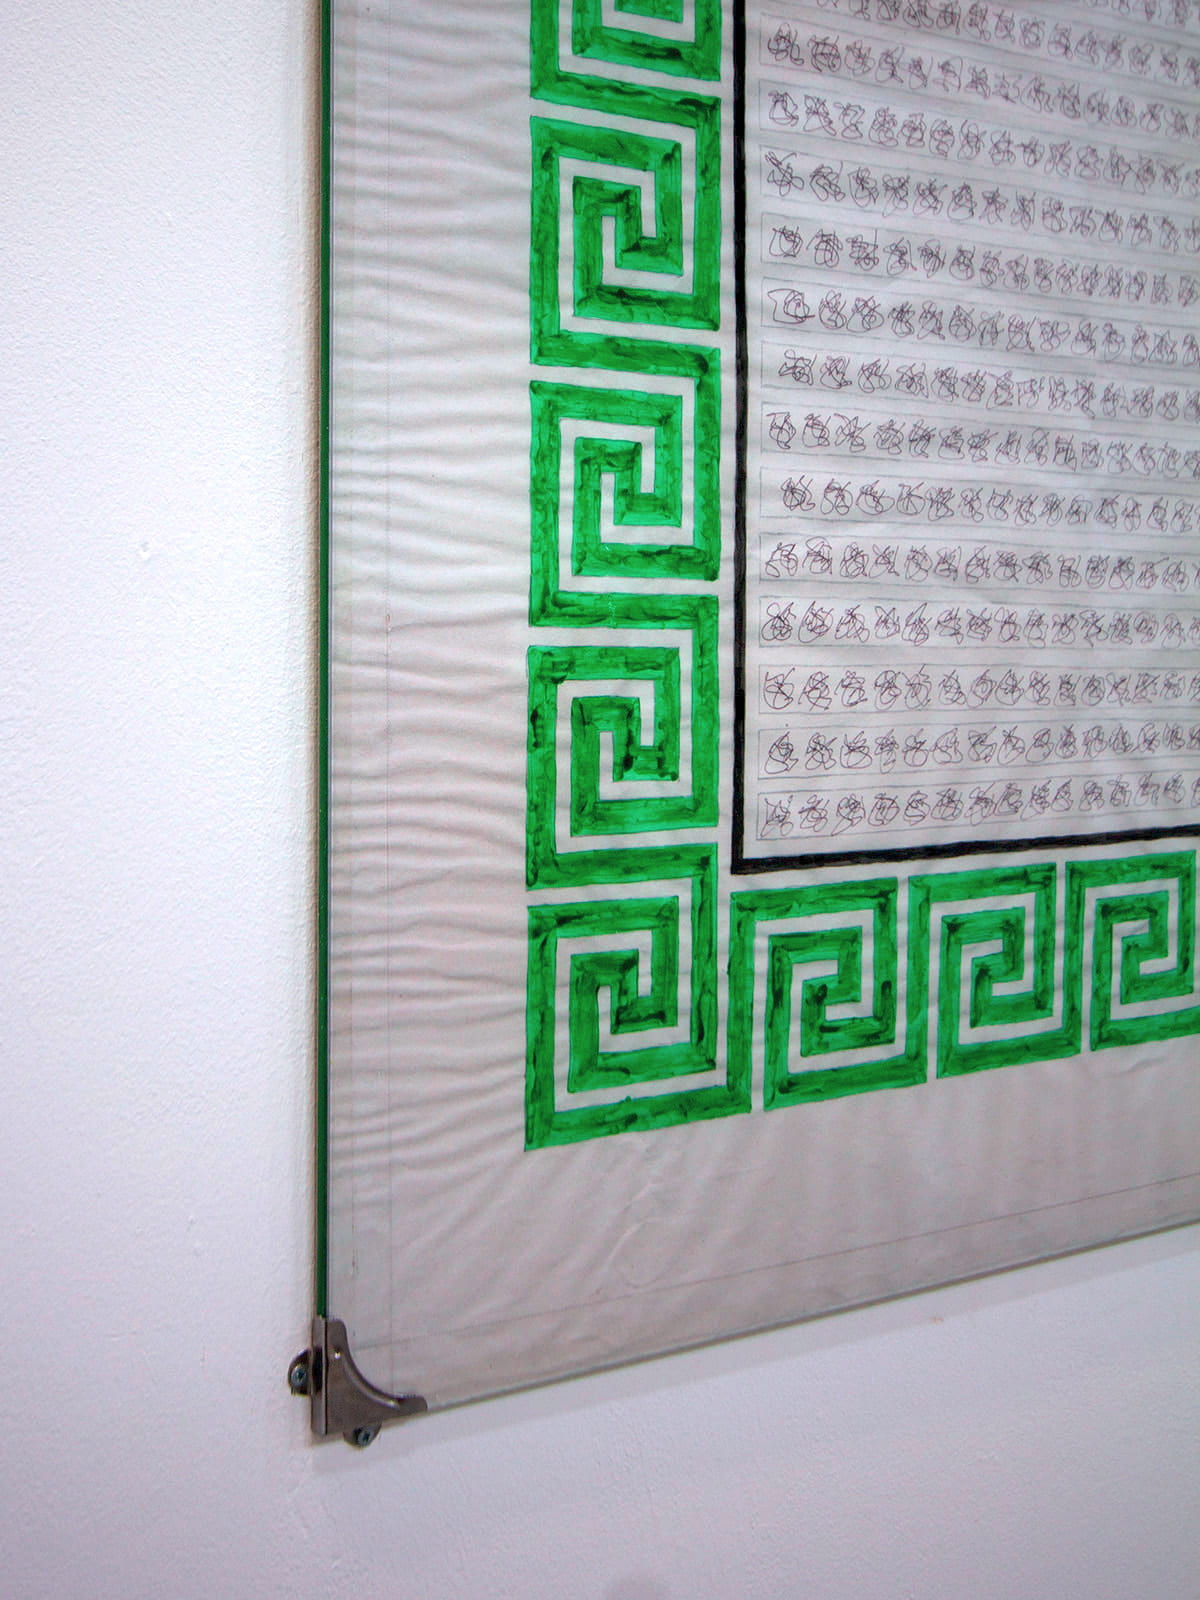 An image of a green and white poster on a white wall.